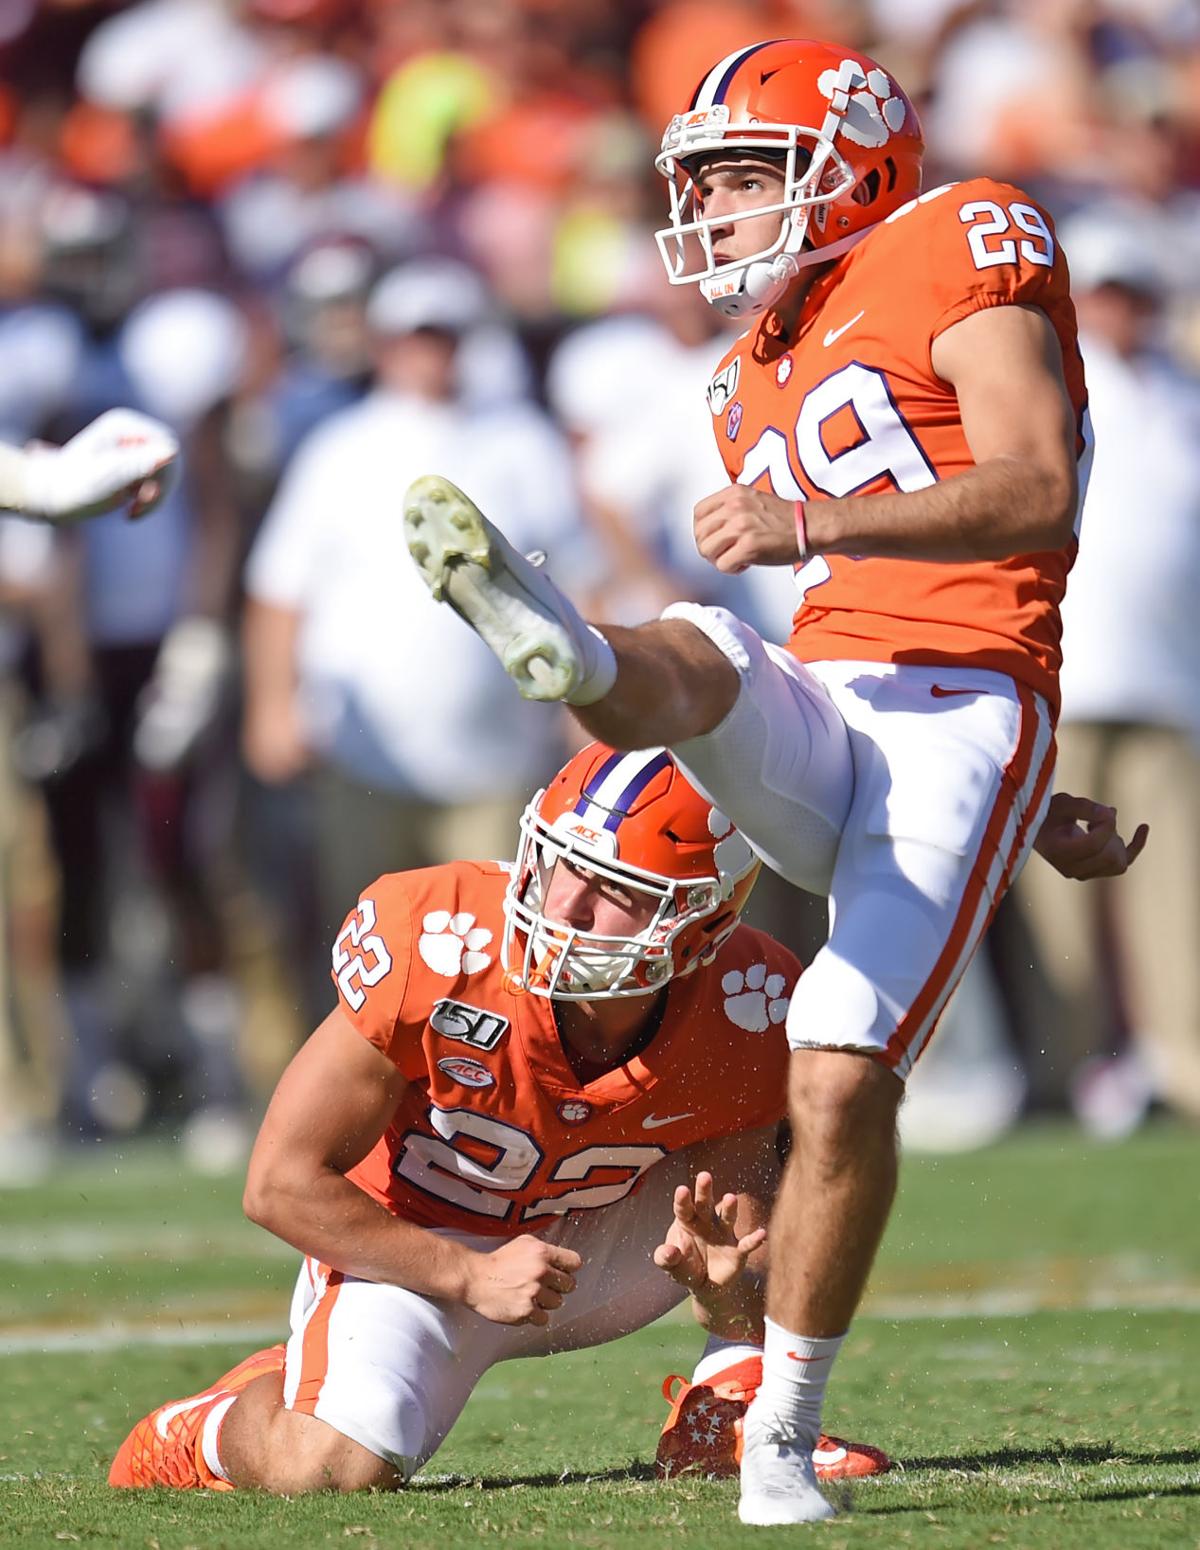 Clemson's inconsistent kicker envisions lastsecond field goal beating